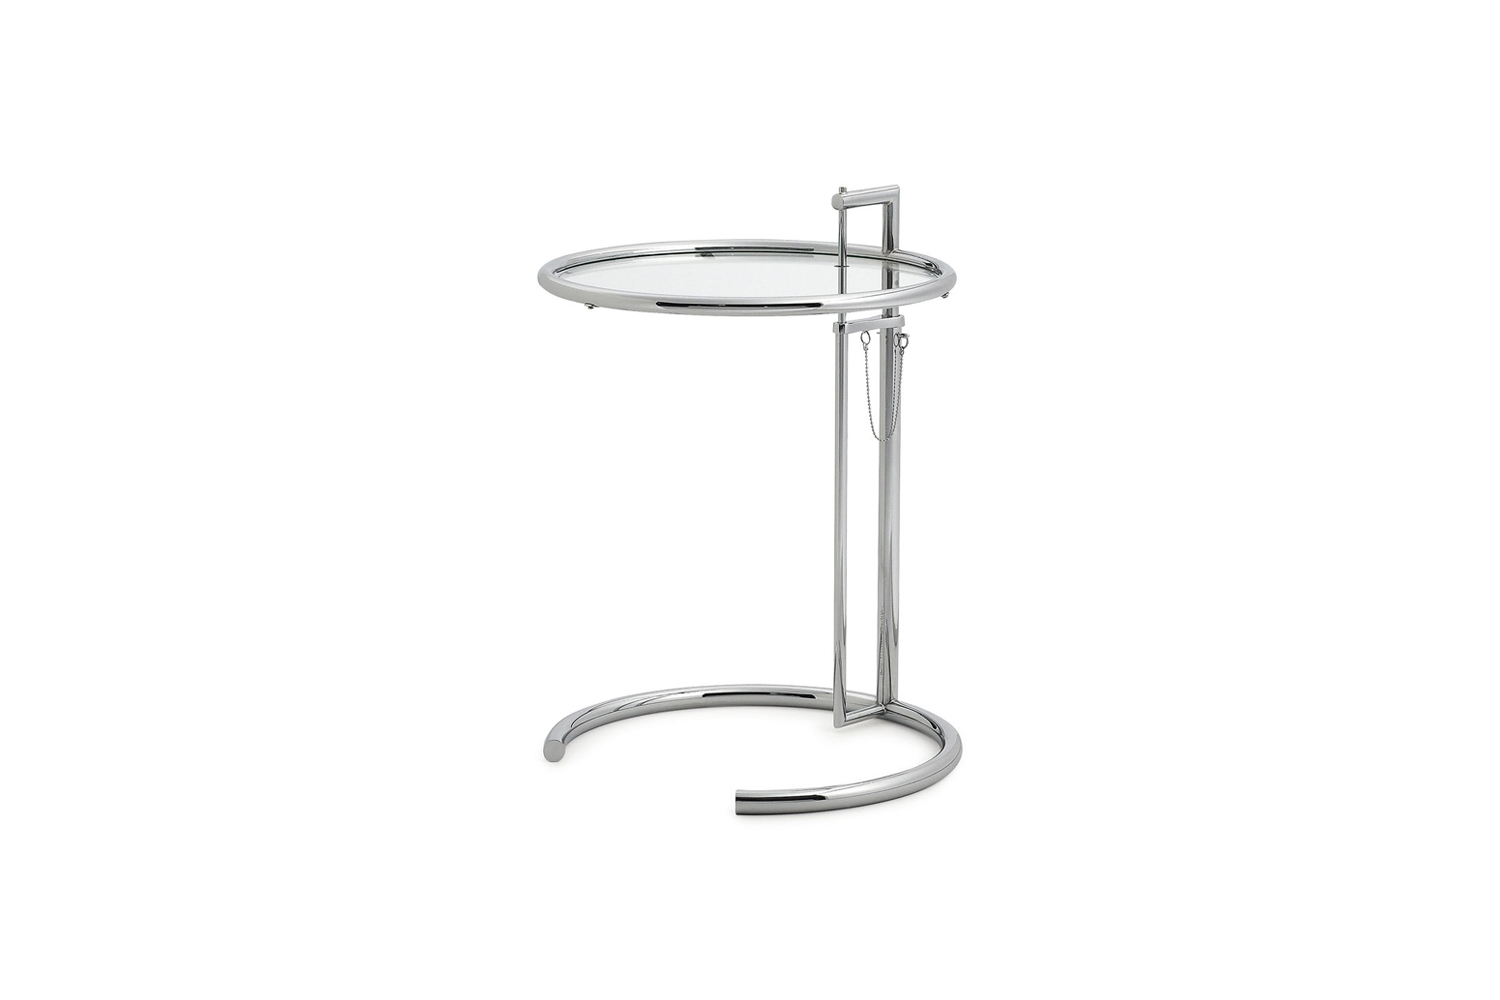 the classic eileen grey design, the e\10\27 adjustable side table is made of tu 24